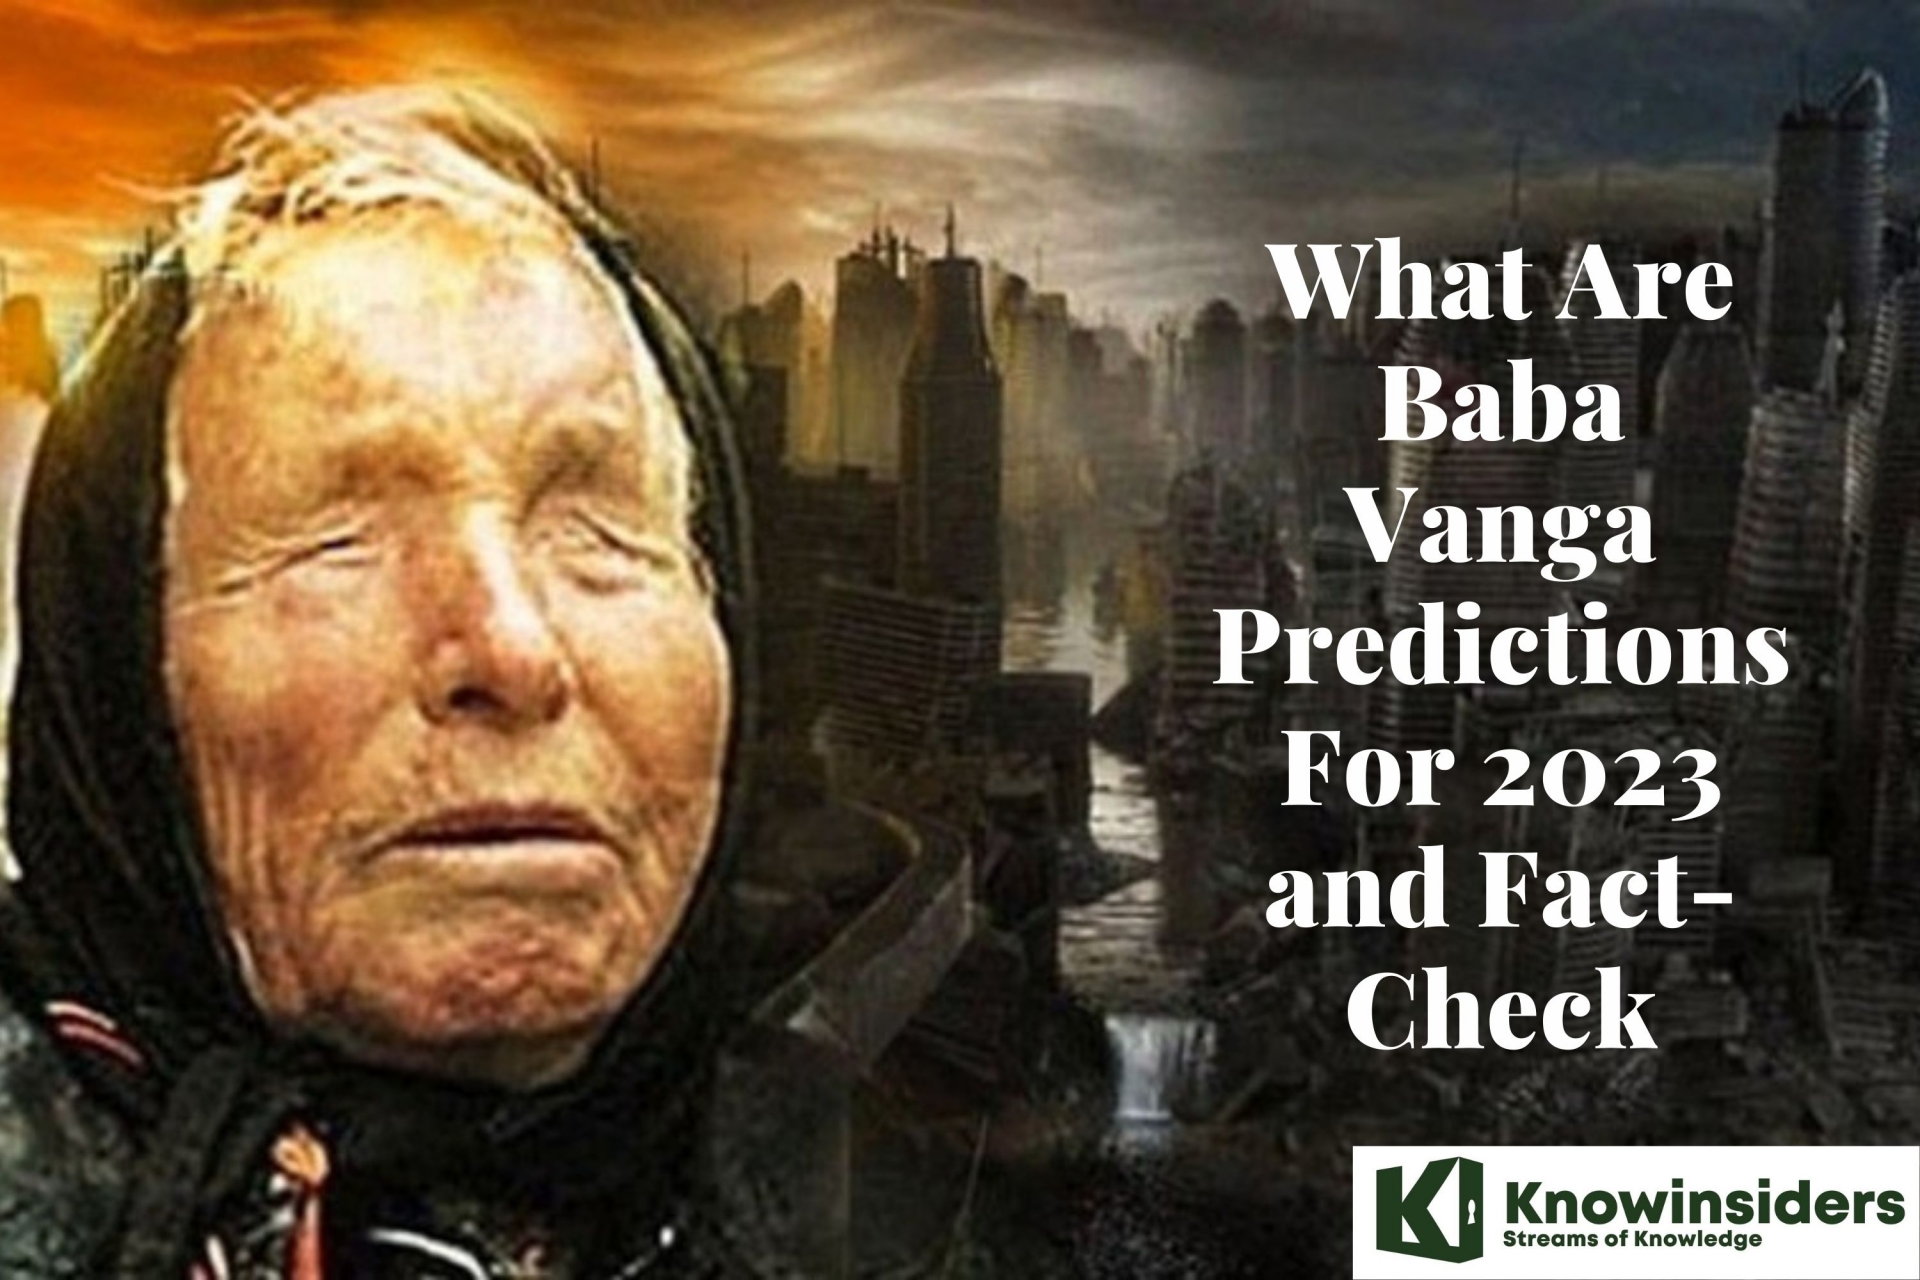 What Are Baba Vanga Predictions For 2023 and Fact-Check